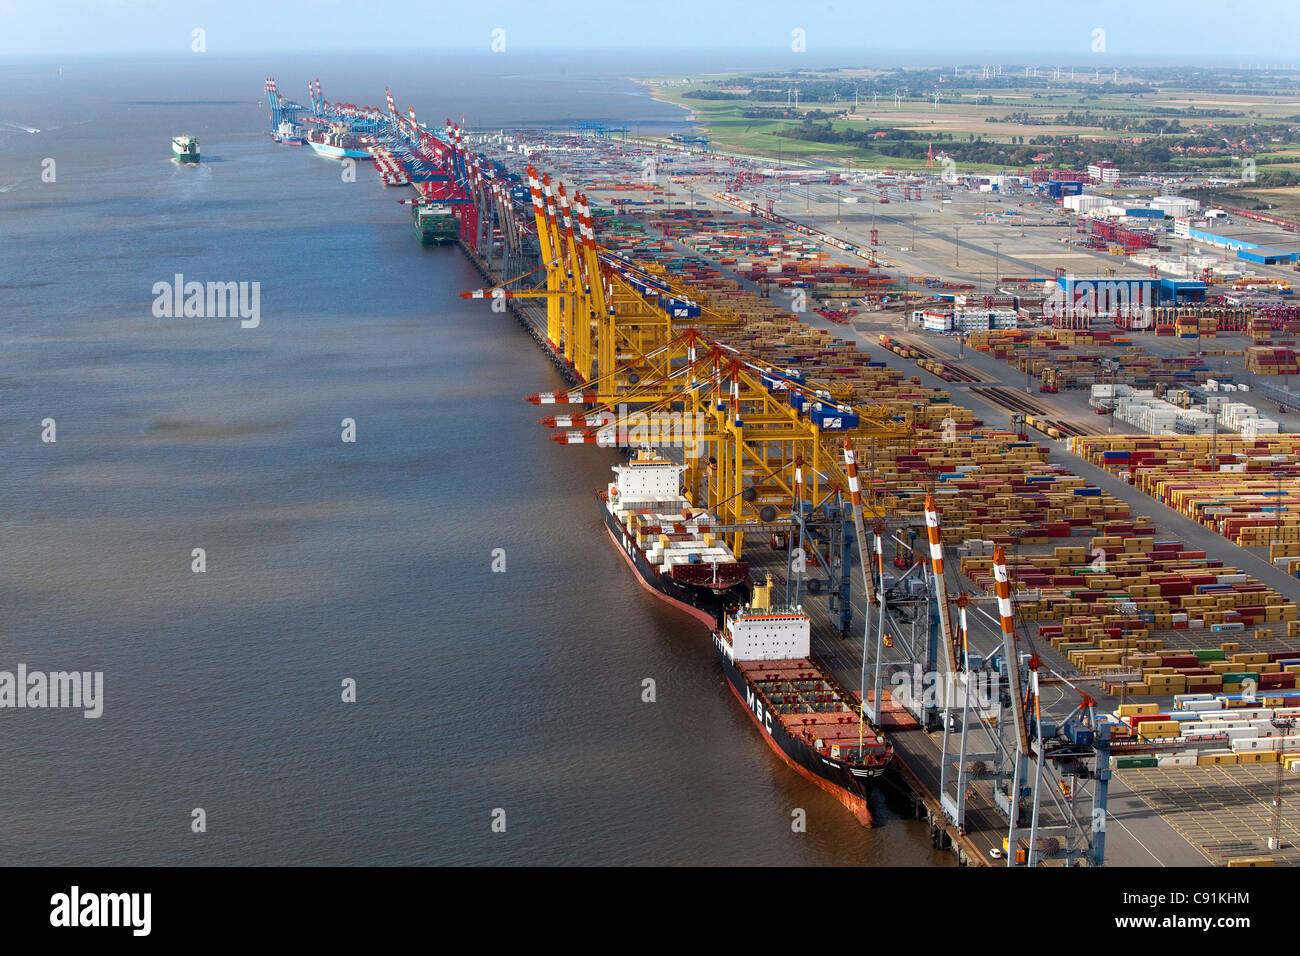 Aerial view of a container port with loading cranes, terminal and freight ships, Bremerhaven, Bremen, Germany Stock Photo